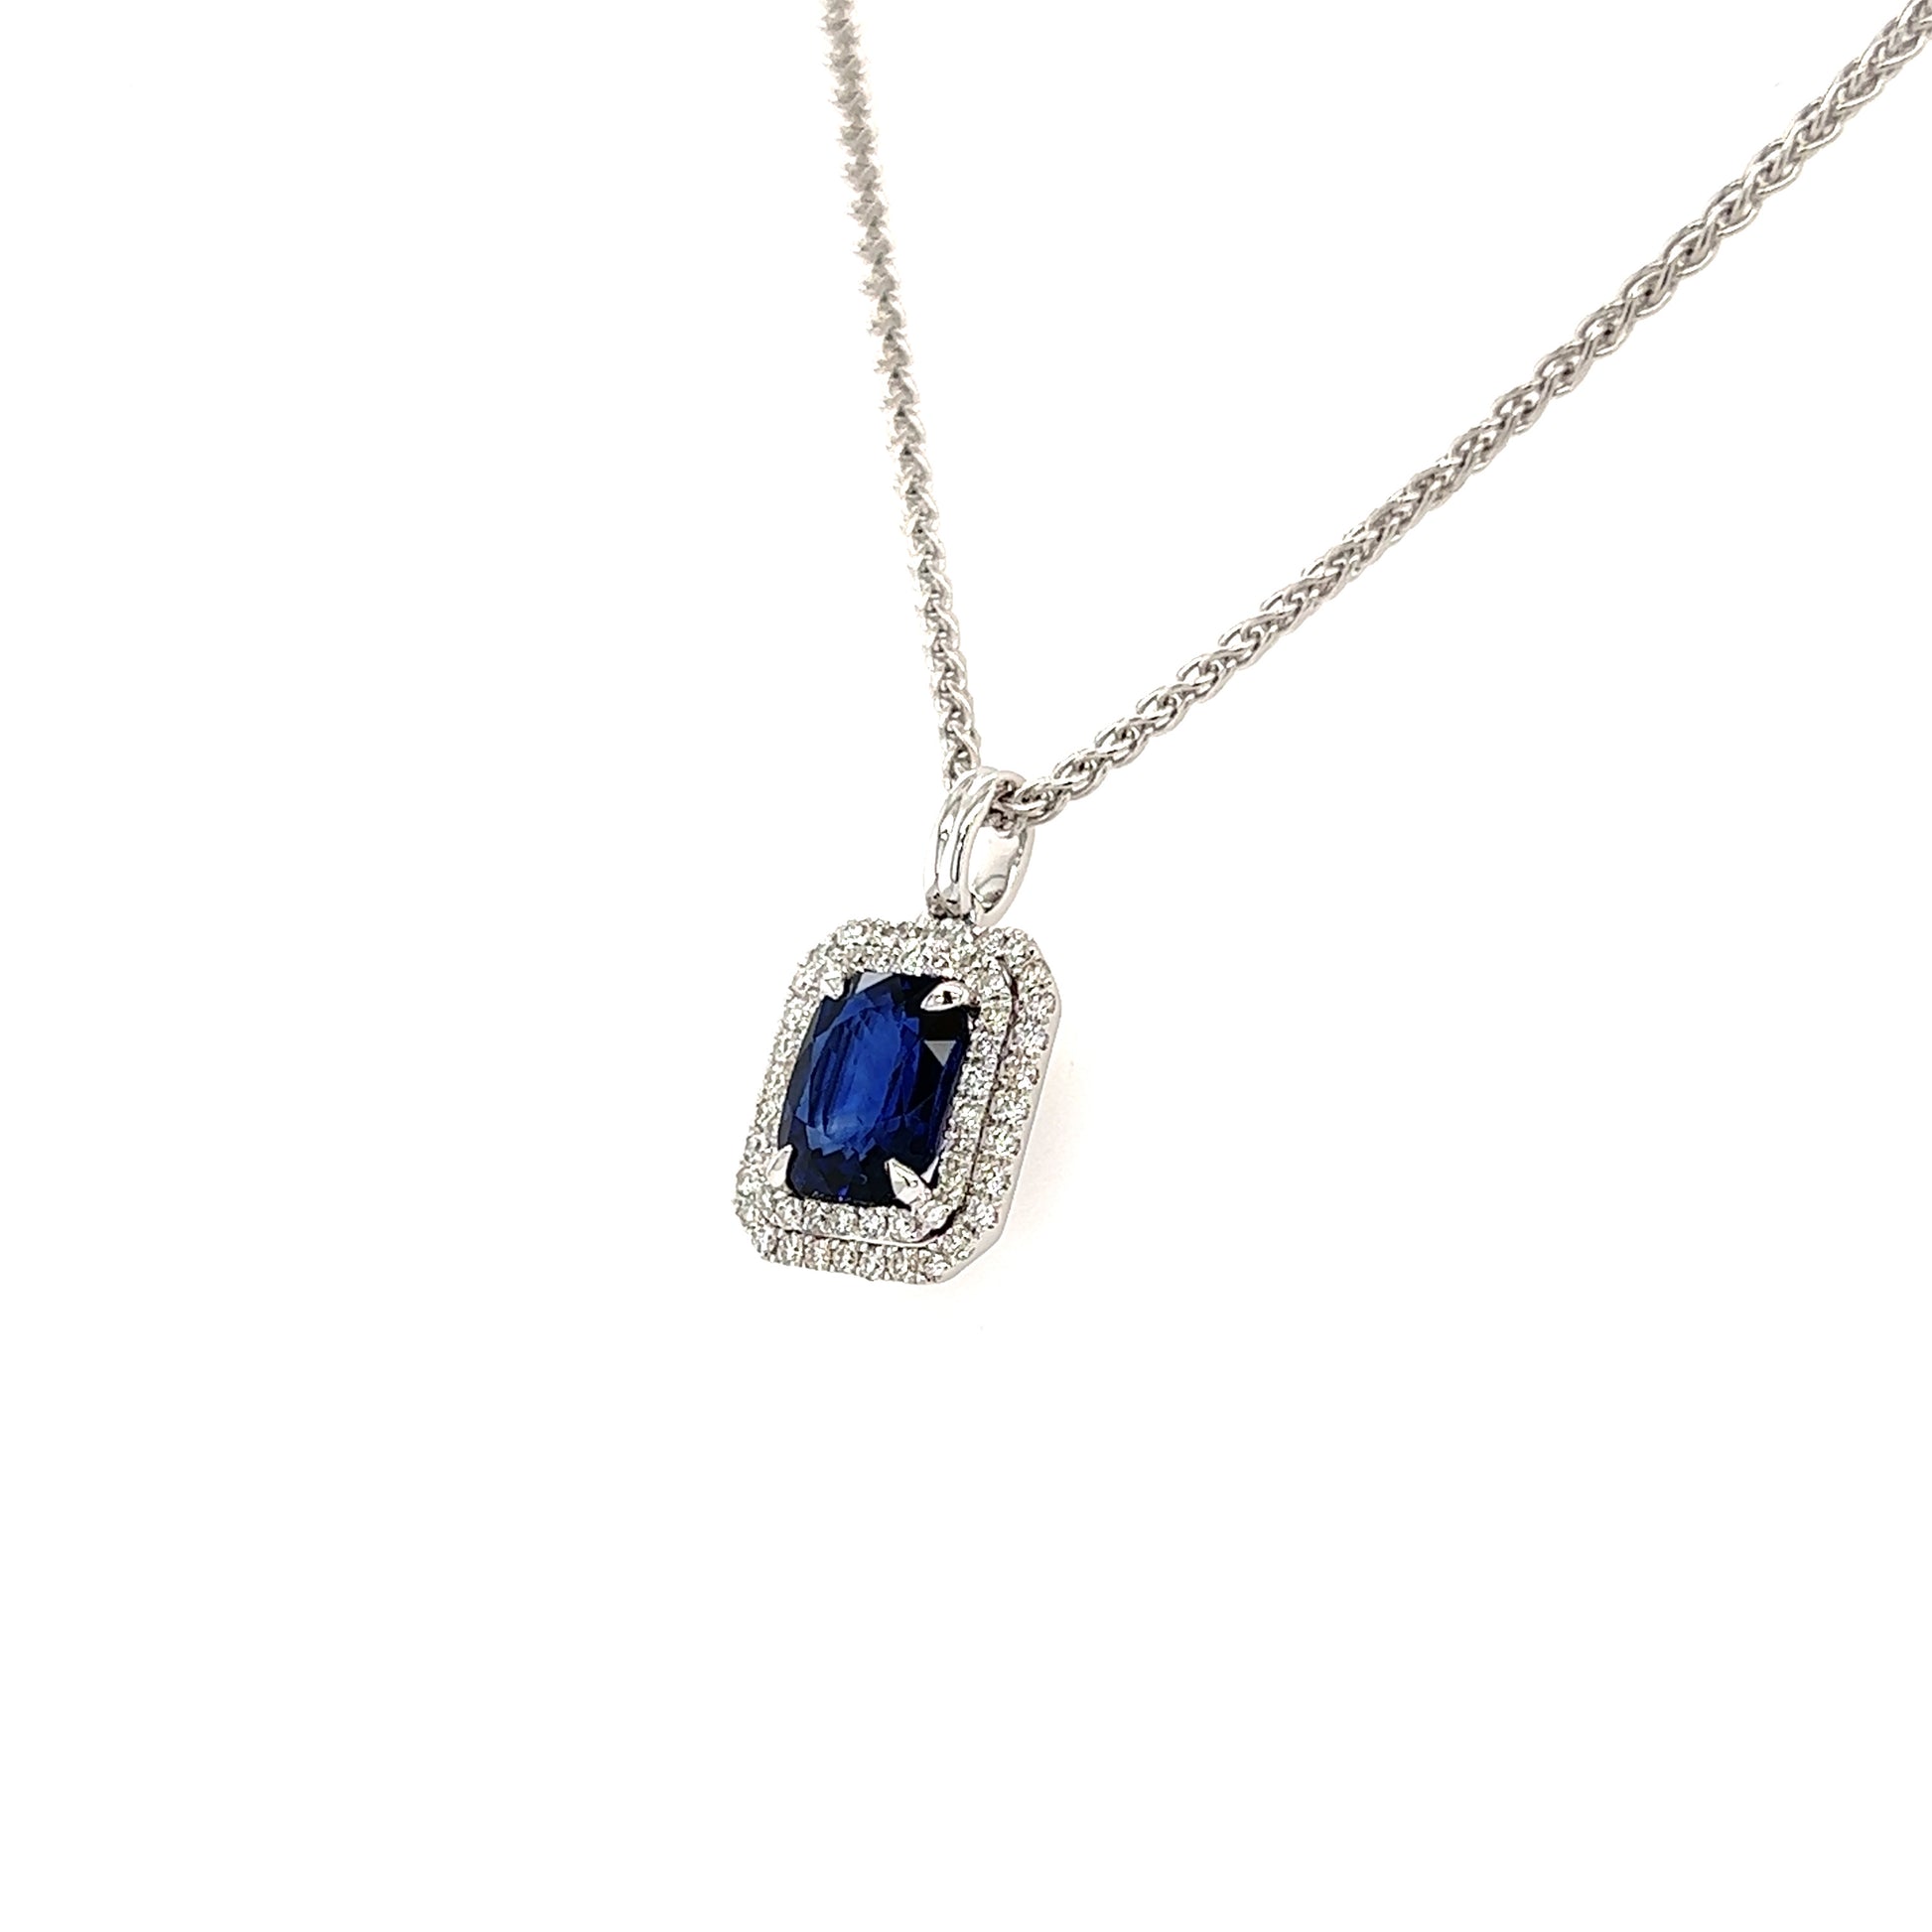 Cushion Sapphire Pendant with Double Diamond Halo in 18K White Gold Pendant and Chain Left Side View